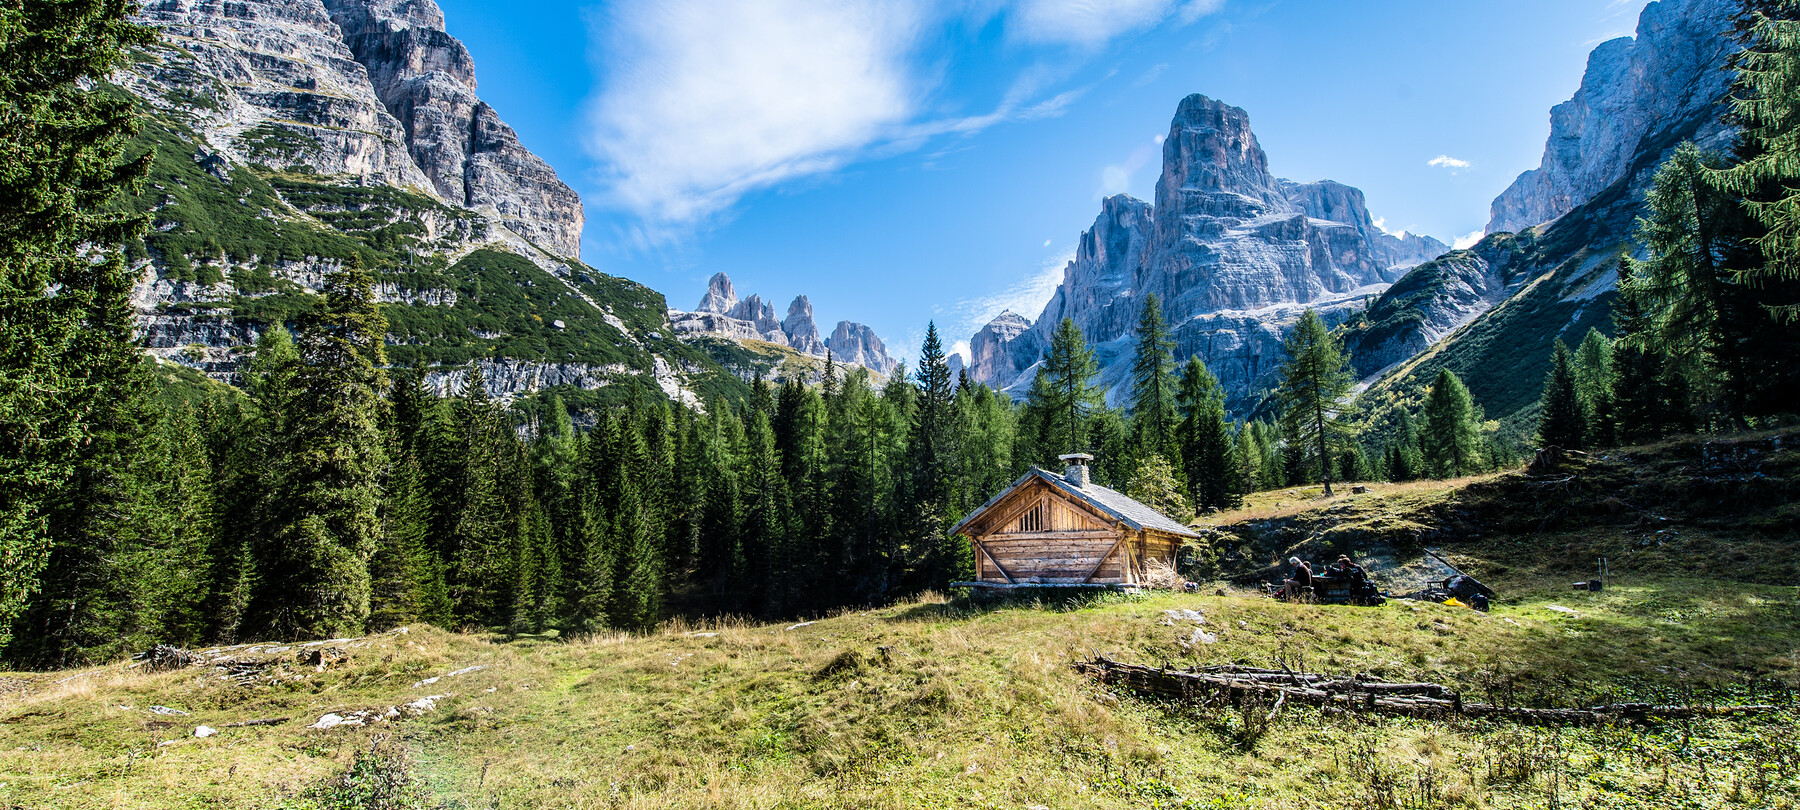 7 wellness itineraries at the feet of the Brenta Dolomites